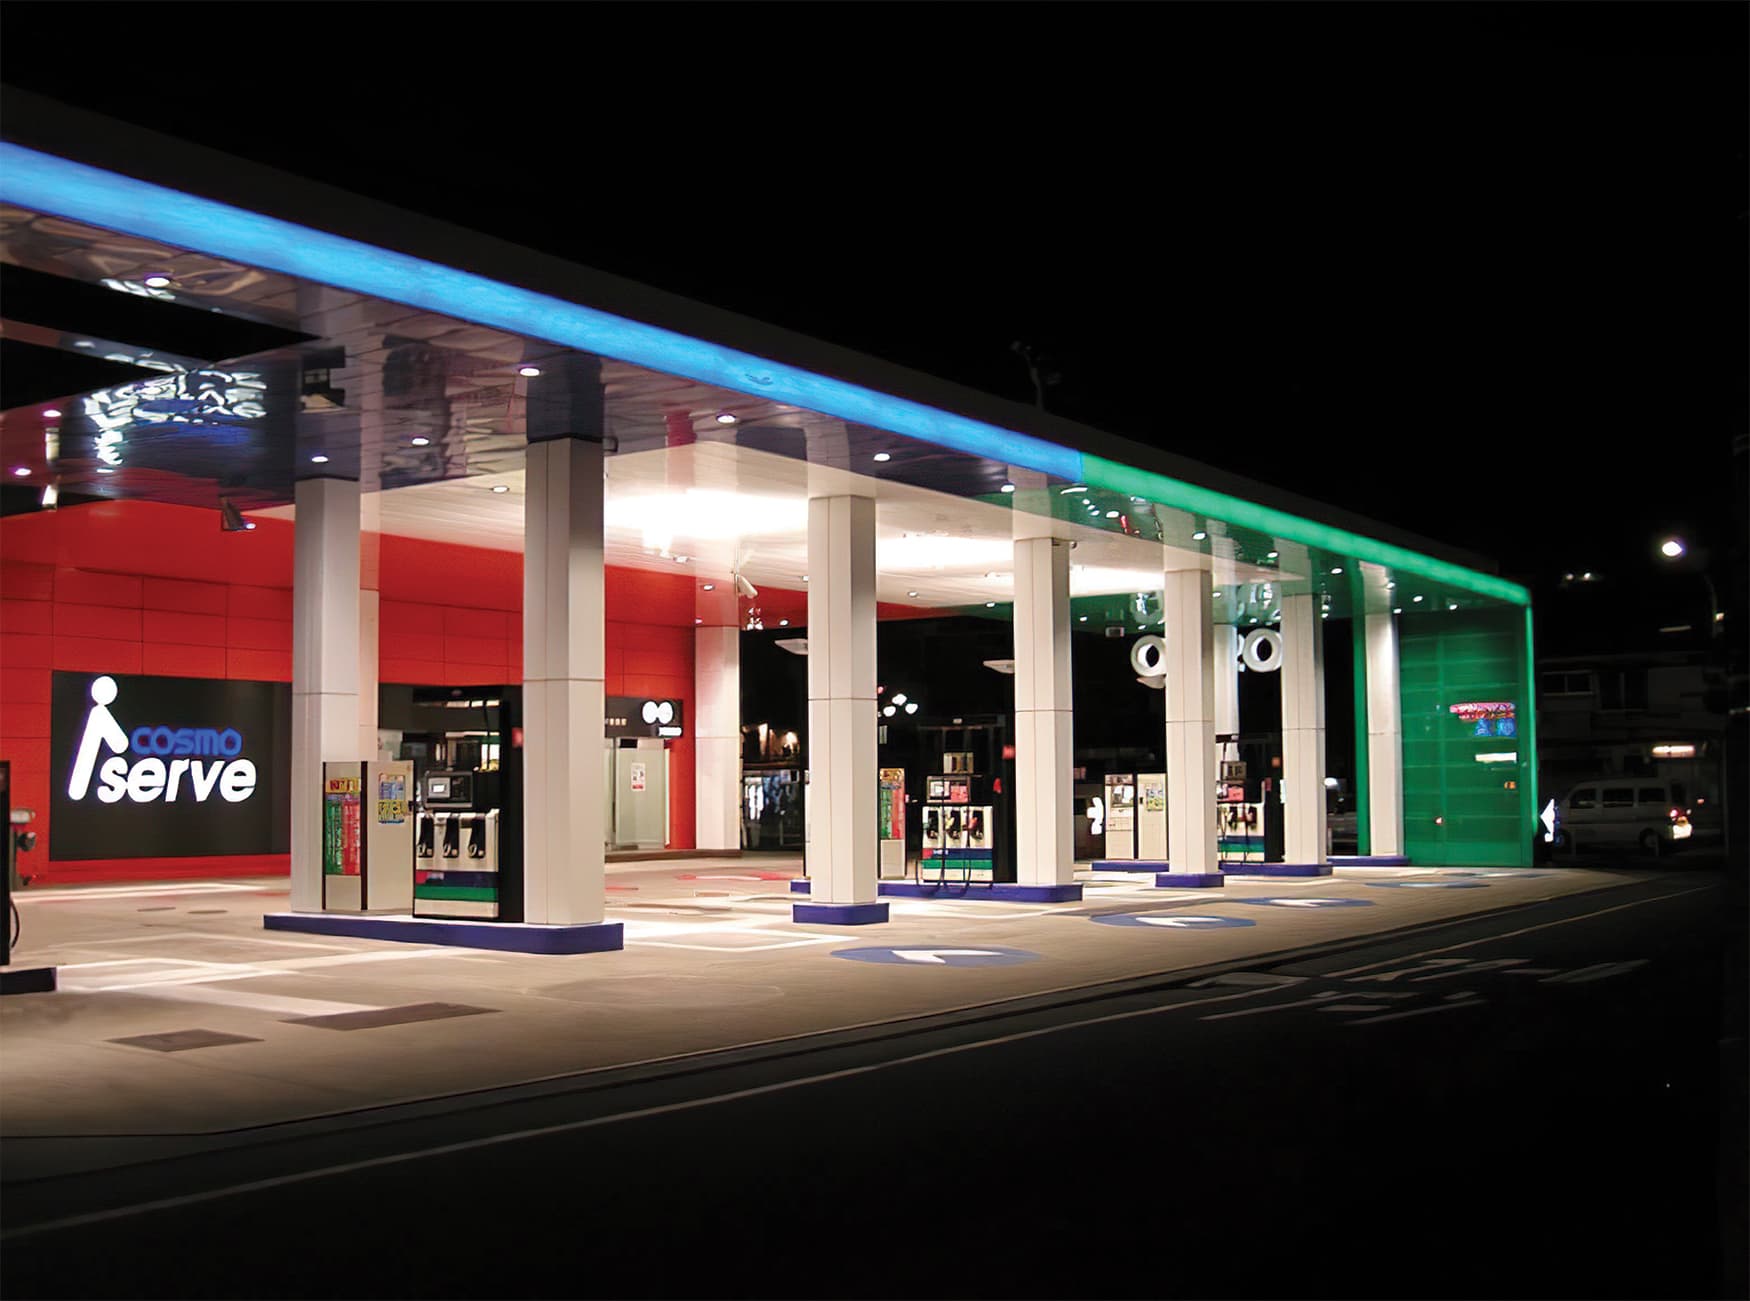 Cosmo i-Serve, a self-serve gas station in Tokyo, Japan. RSM Design prepared environmental graphics and branding services.